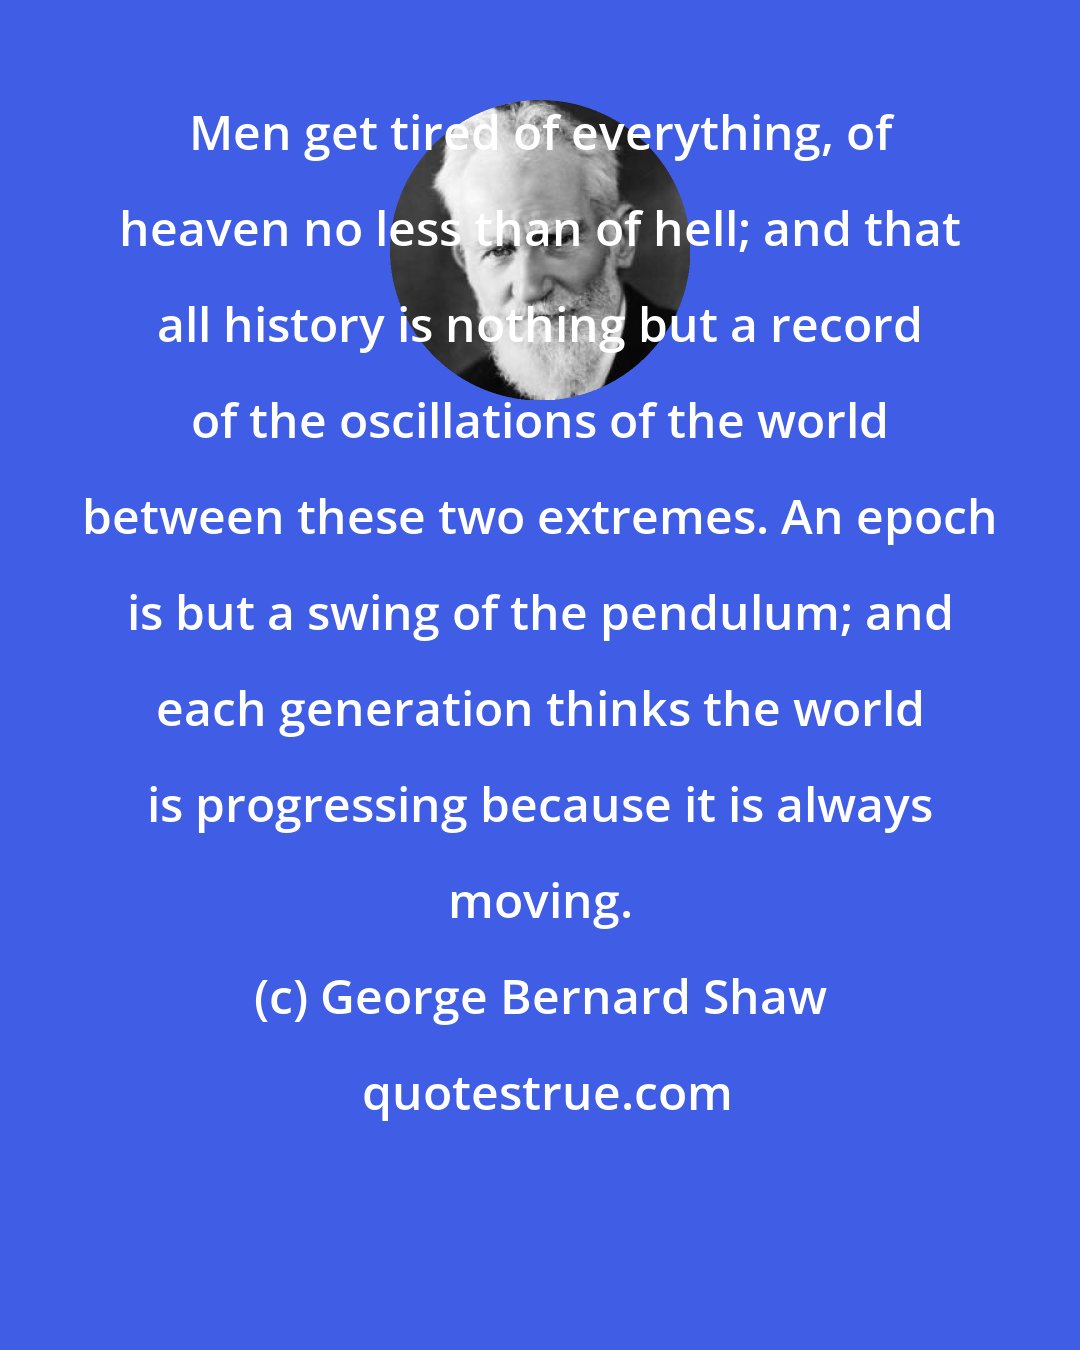 George Bernard Shaw: Men get tired of everything, of heaven no less than of hell; and that all history is nothing but a record of the oscillations of the world between these two extremes. An epoch is but a swing of the pendulum; and each generation thinks the world is progressing because it is always moving.